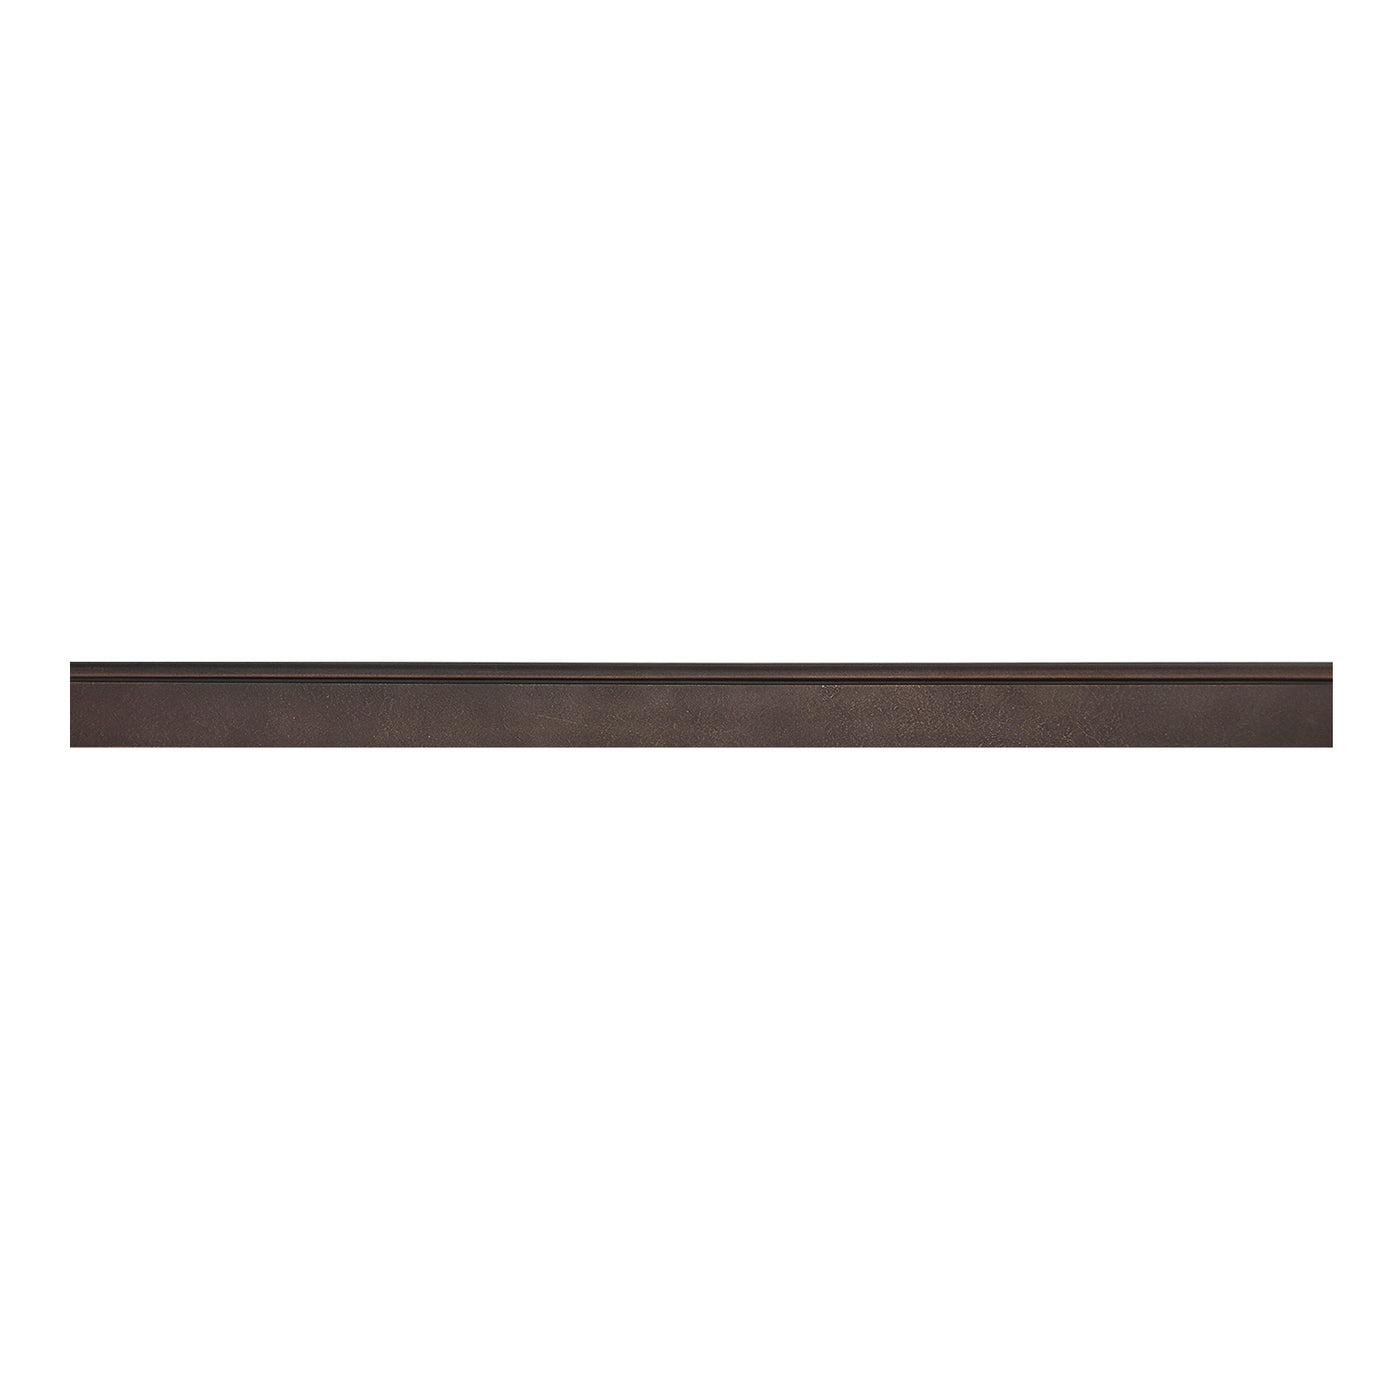 Questech City Scape Burnished 1" x 18" Metal Bullnose